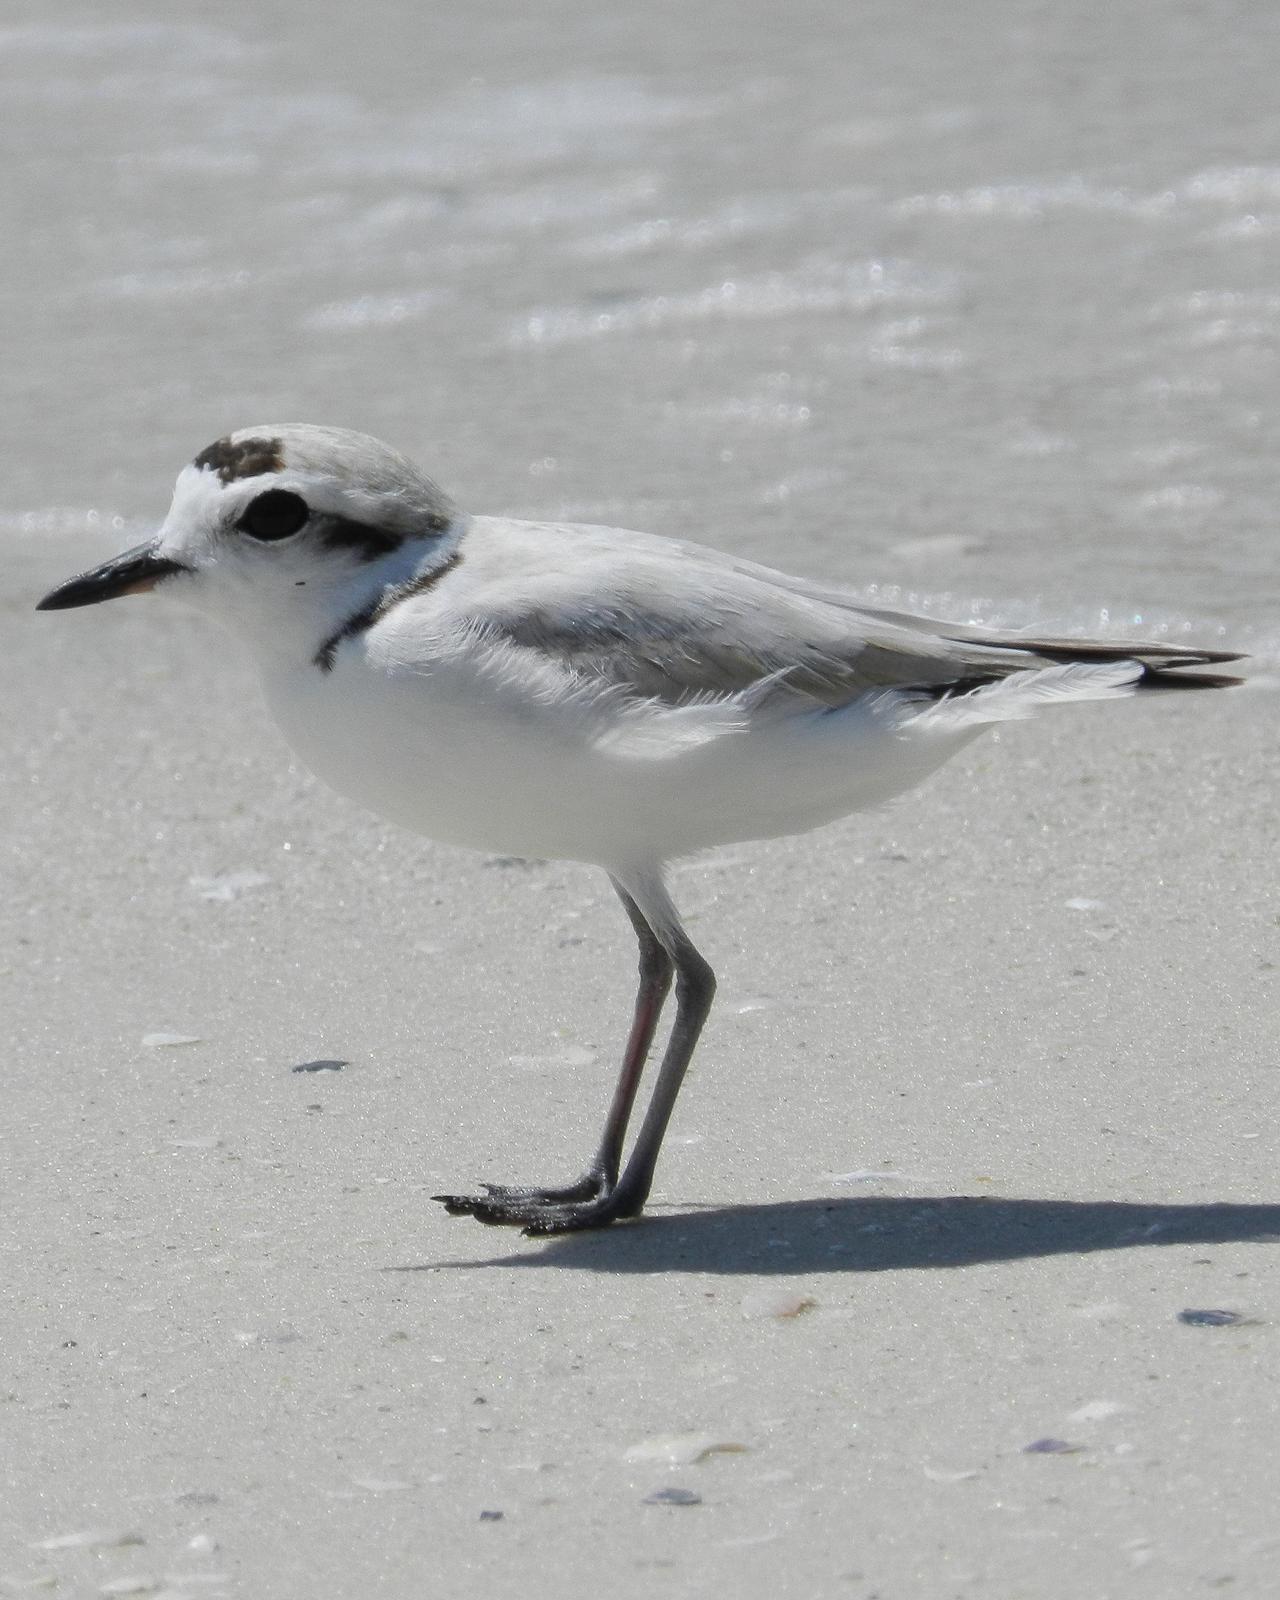 Snowy Plover Photo by Steve Percival